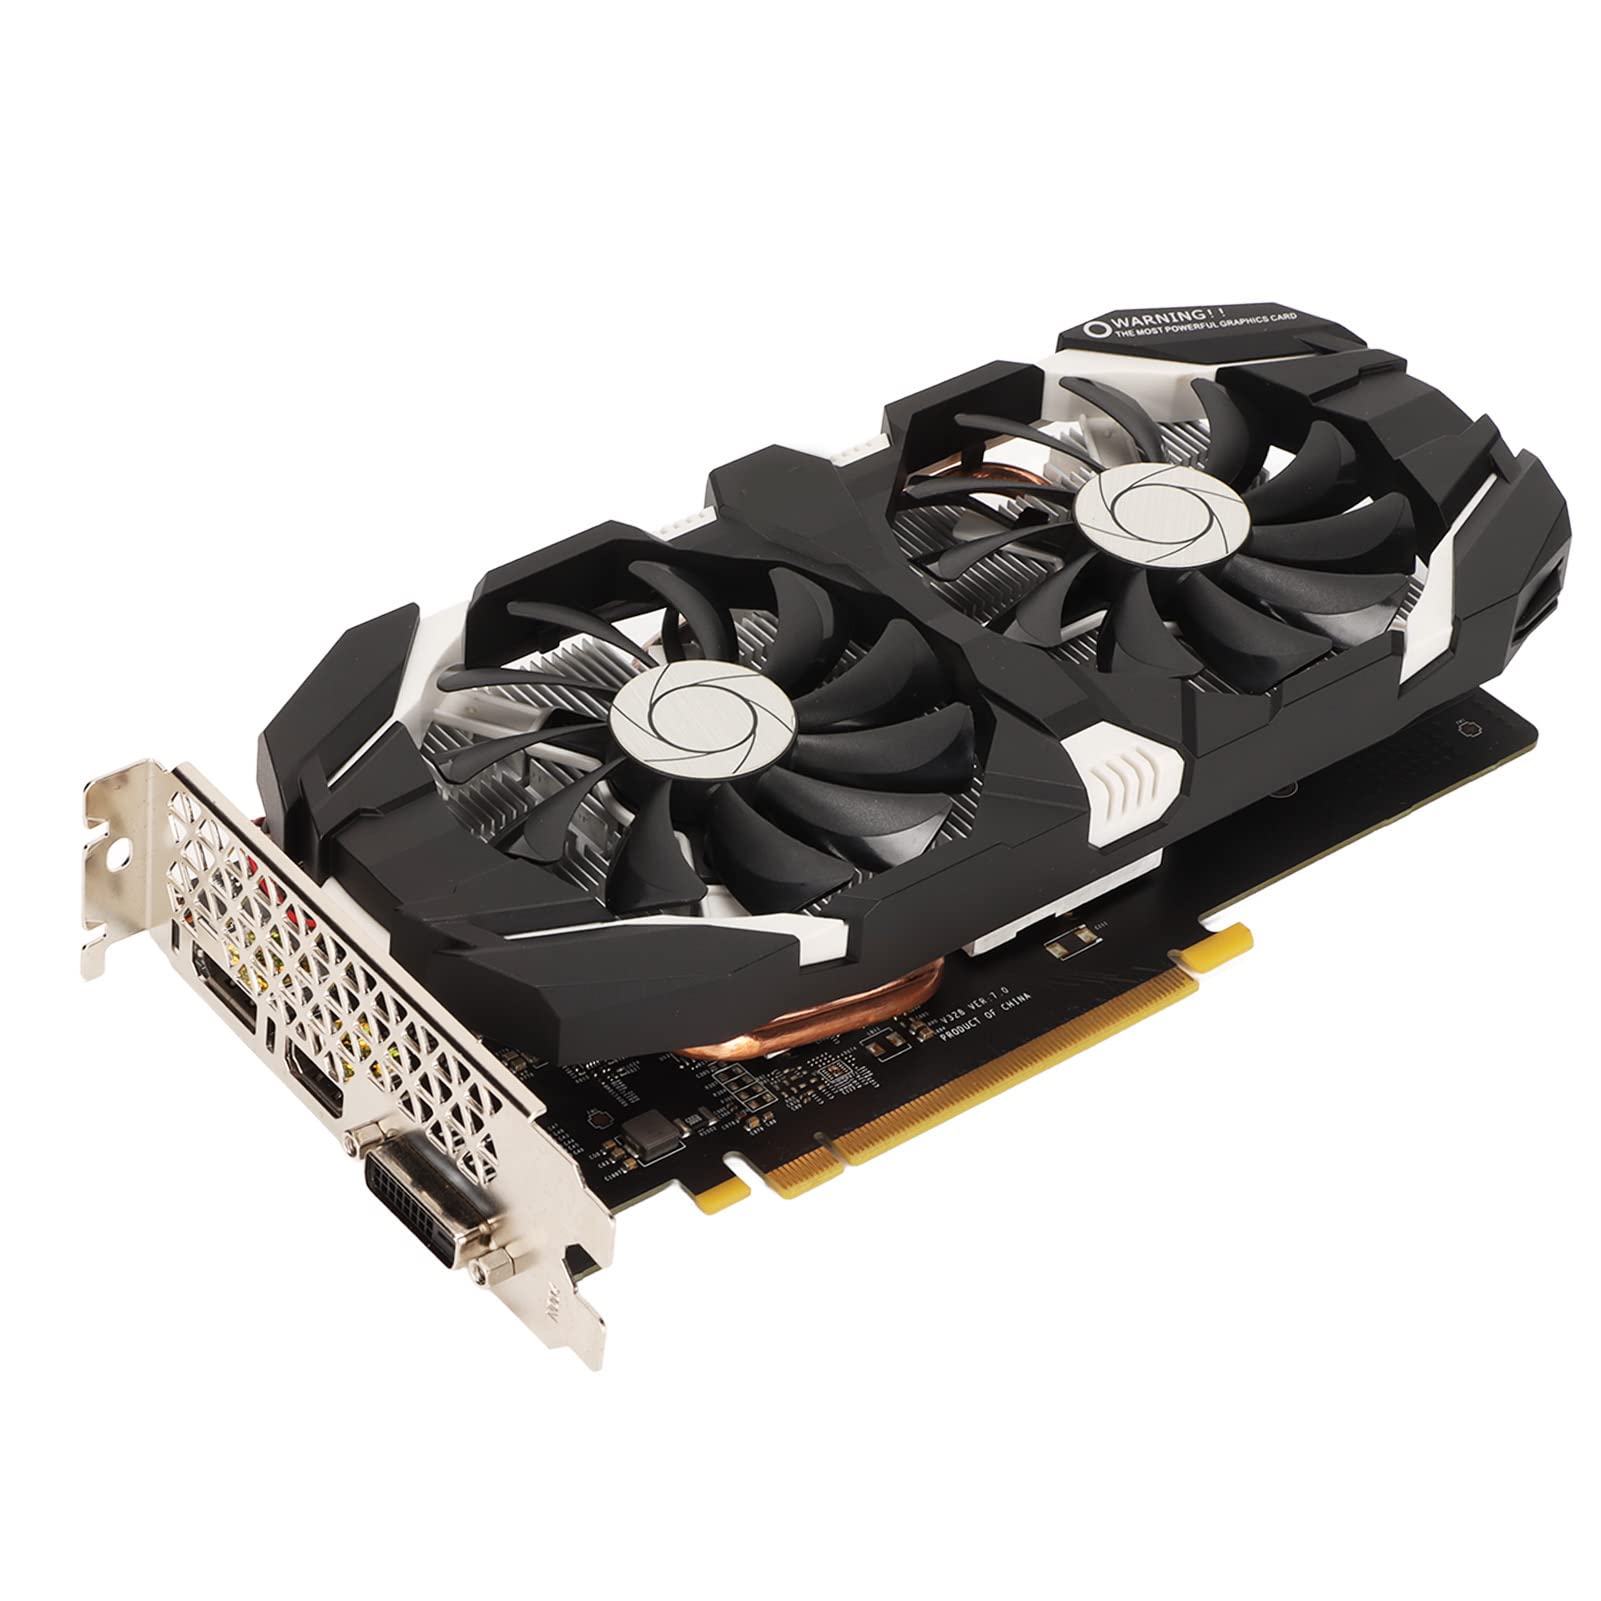 Zunate GTX1060 GDDR5 192bit PCIE Graphic Card Dual Fans 8008MHz Memory Frequency Computer Graphics Card HDMI DVI DP 4K HDR